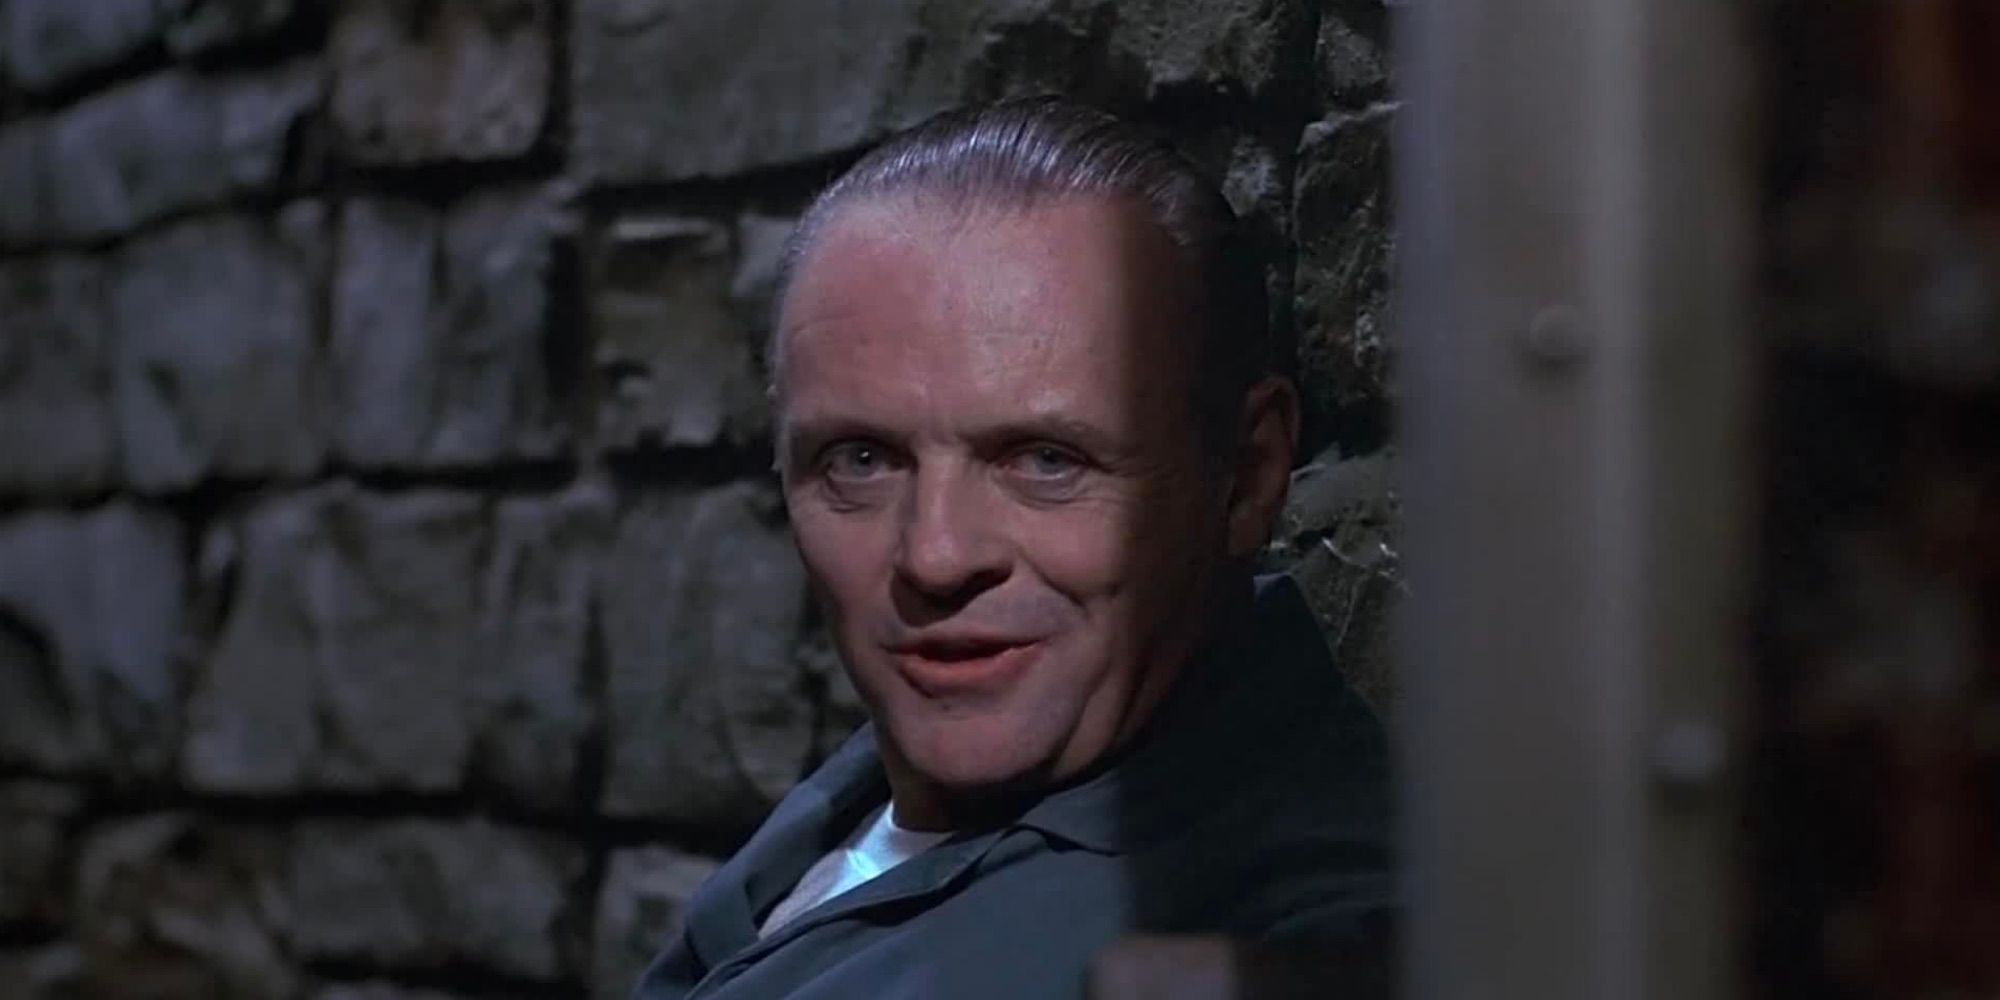 Hannibal Lecter i fængsel i Silence of the Lambs